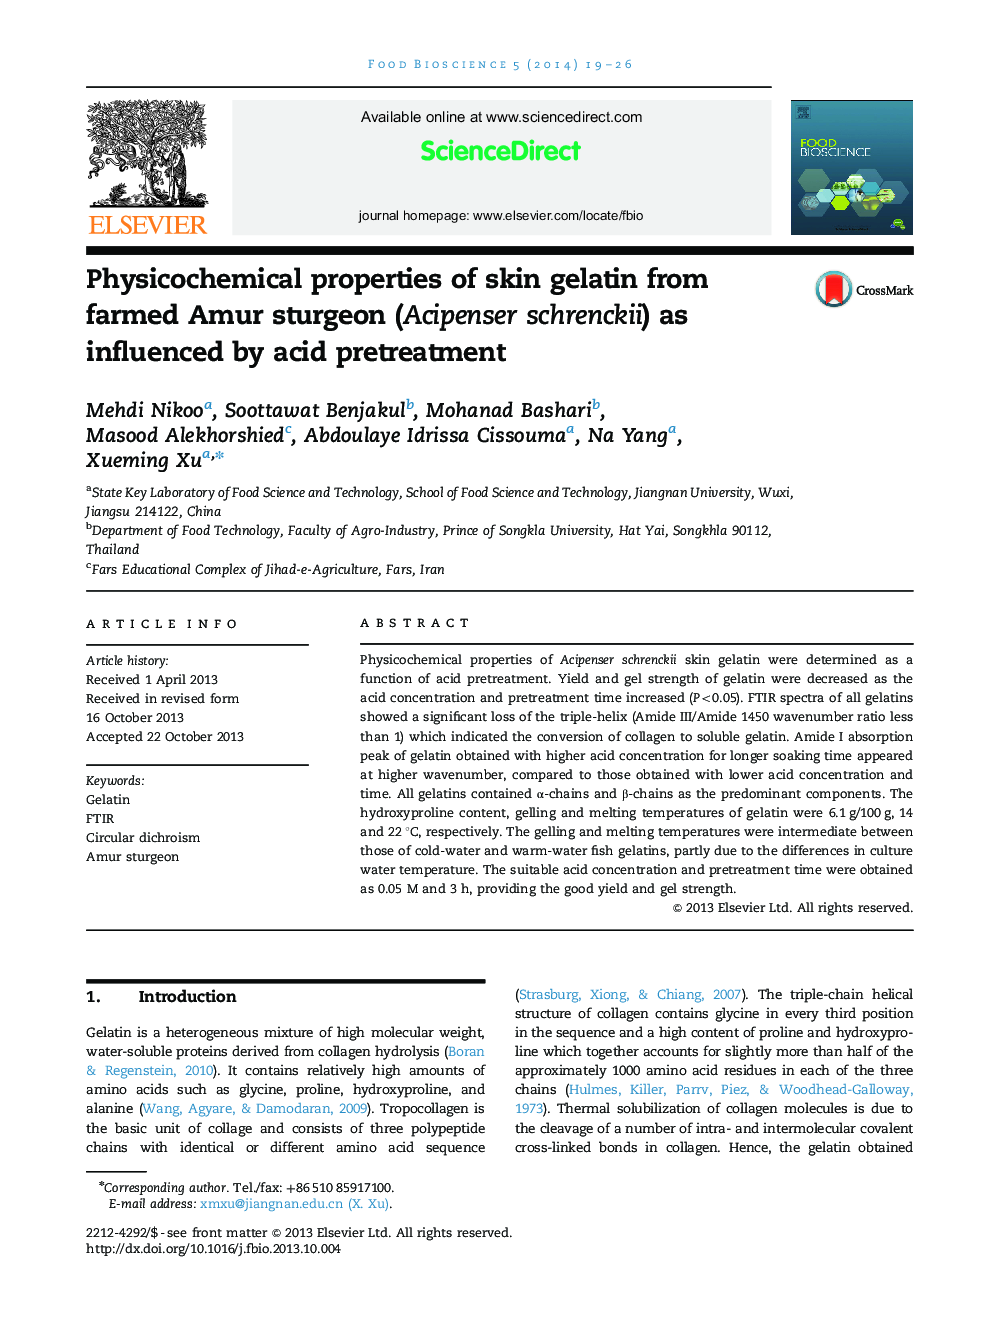 Physicochemical properties of skin gelatin from farmed Amur sturgeon (Acipenser schrenckii) as influenced by acid pretreatment